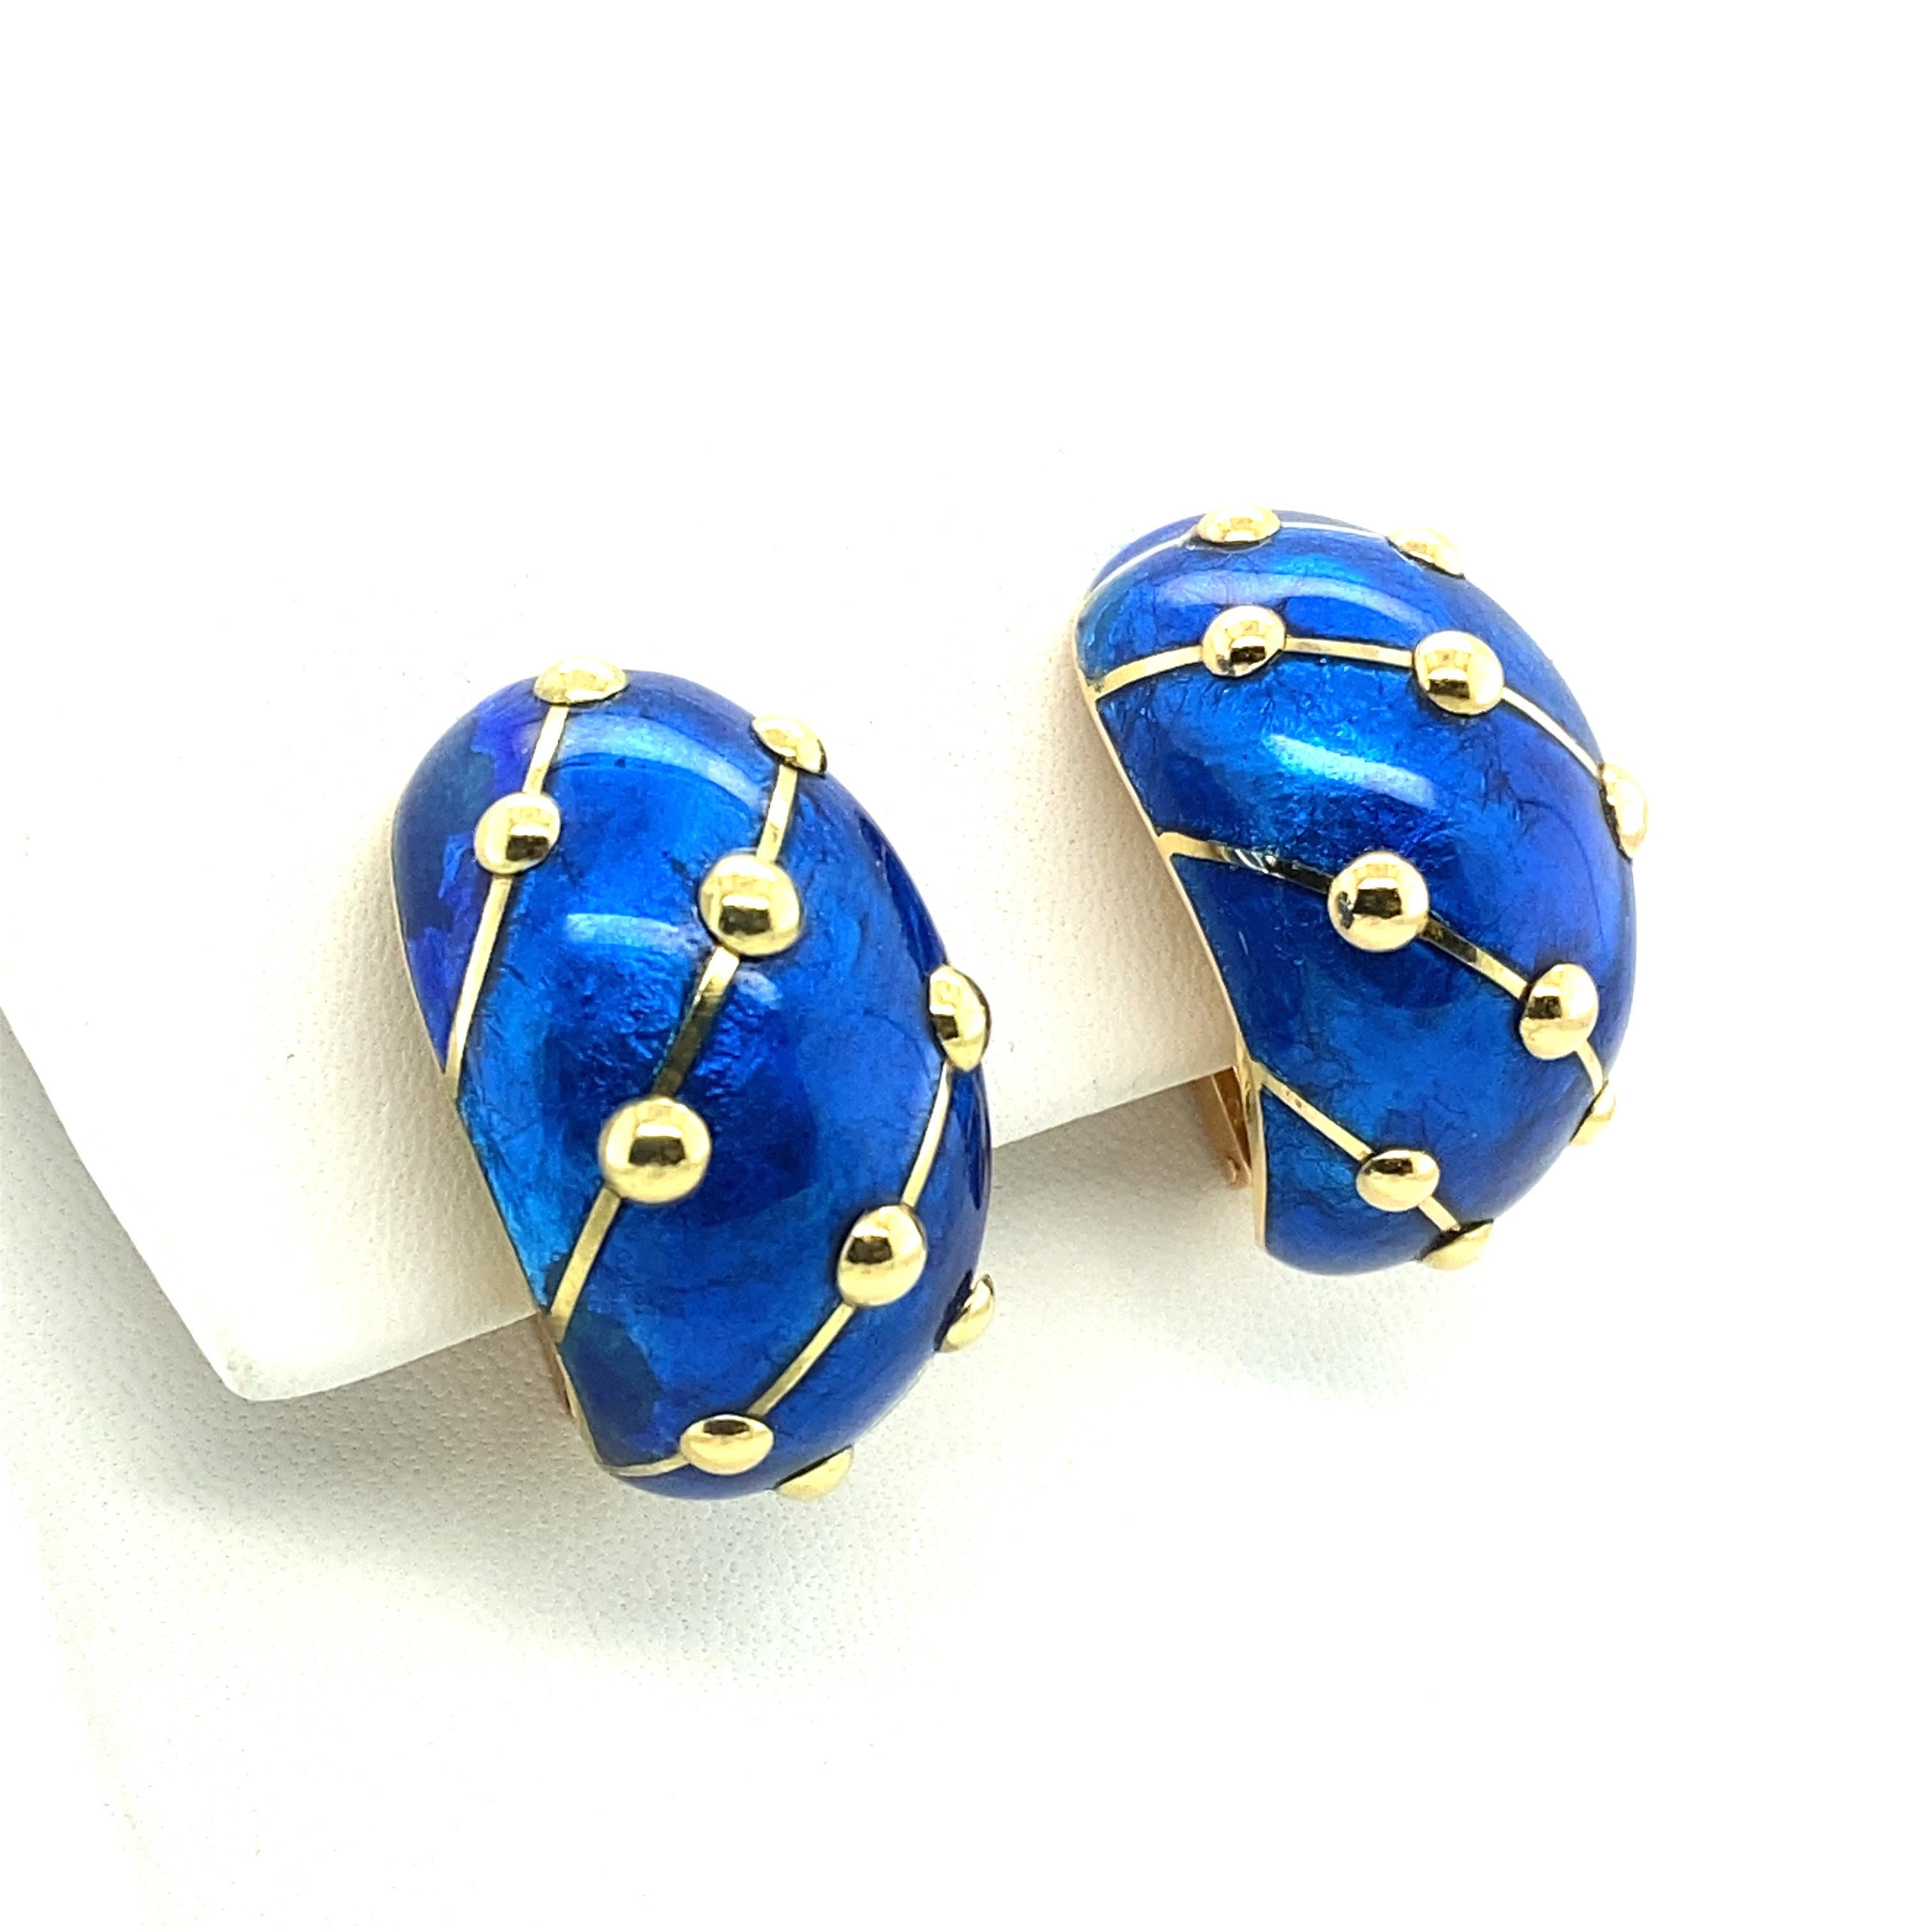 Women's or Men's Pair of Gold and Blue Paillonné Enamel 'Banana' Earrings by Jean Schlumberger